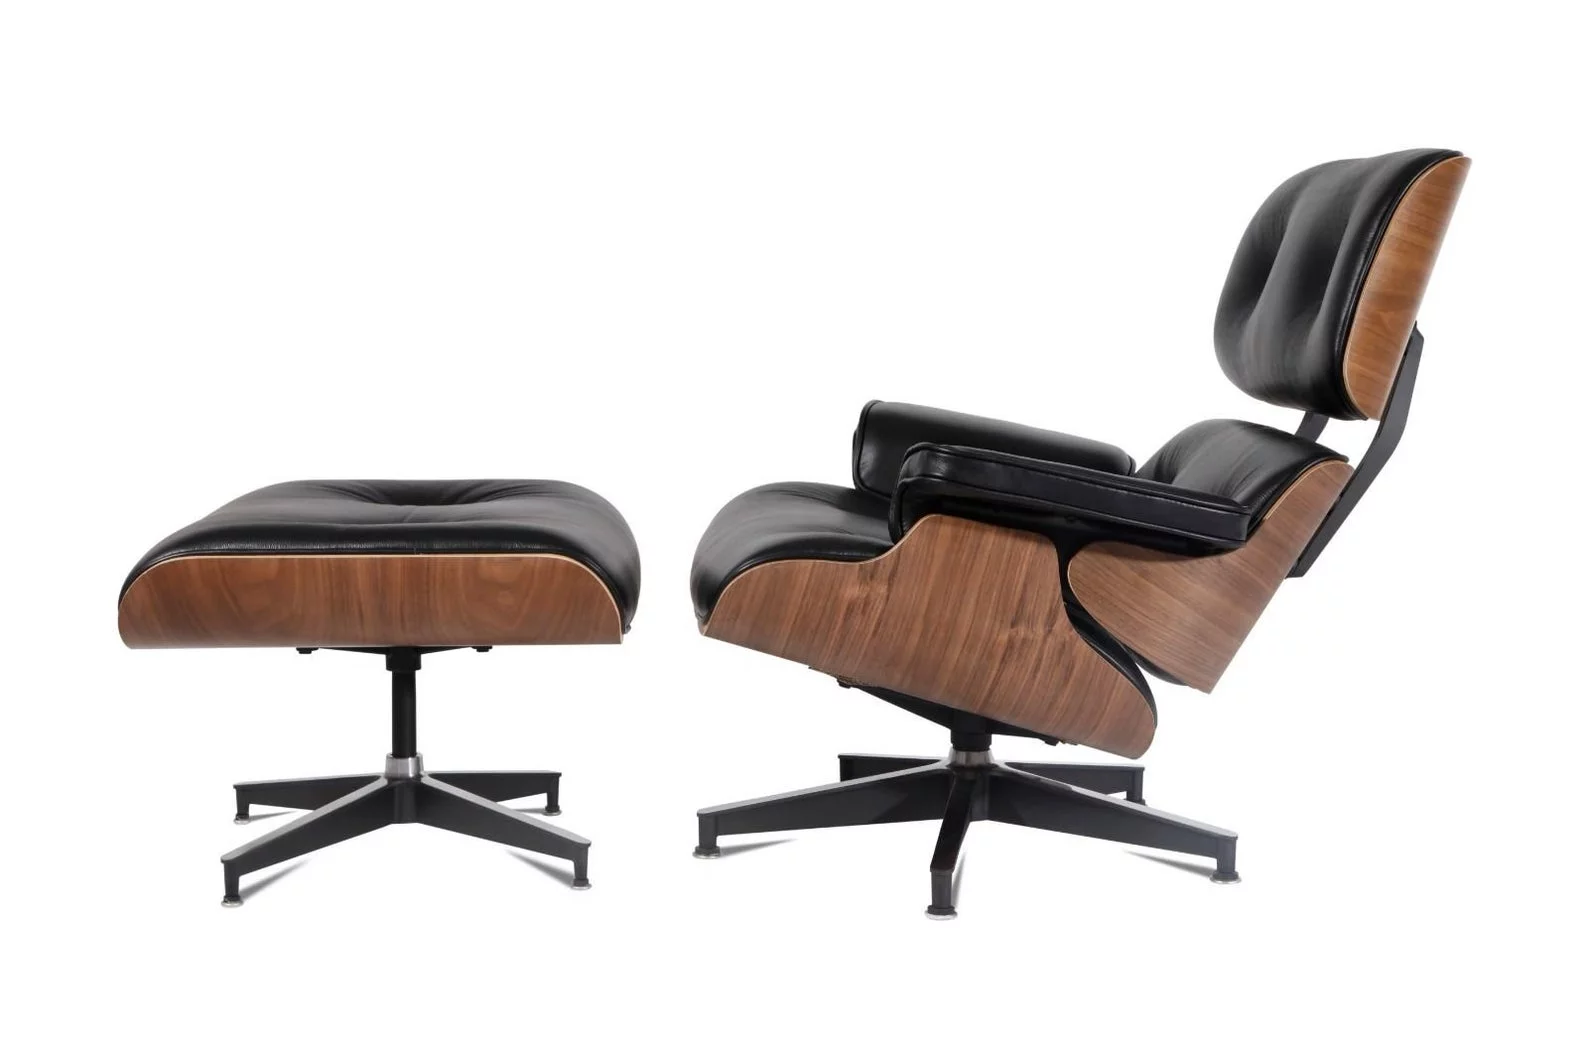 this is an eames lounge chair replica